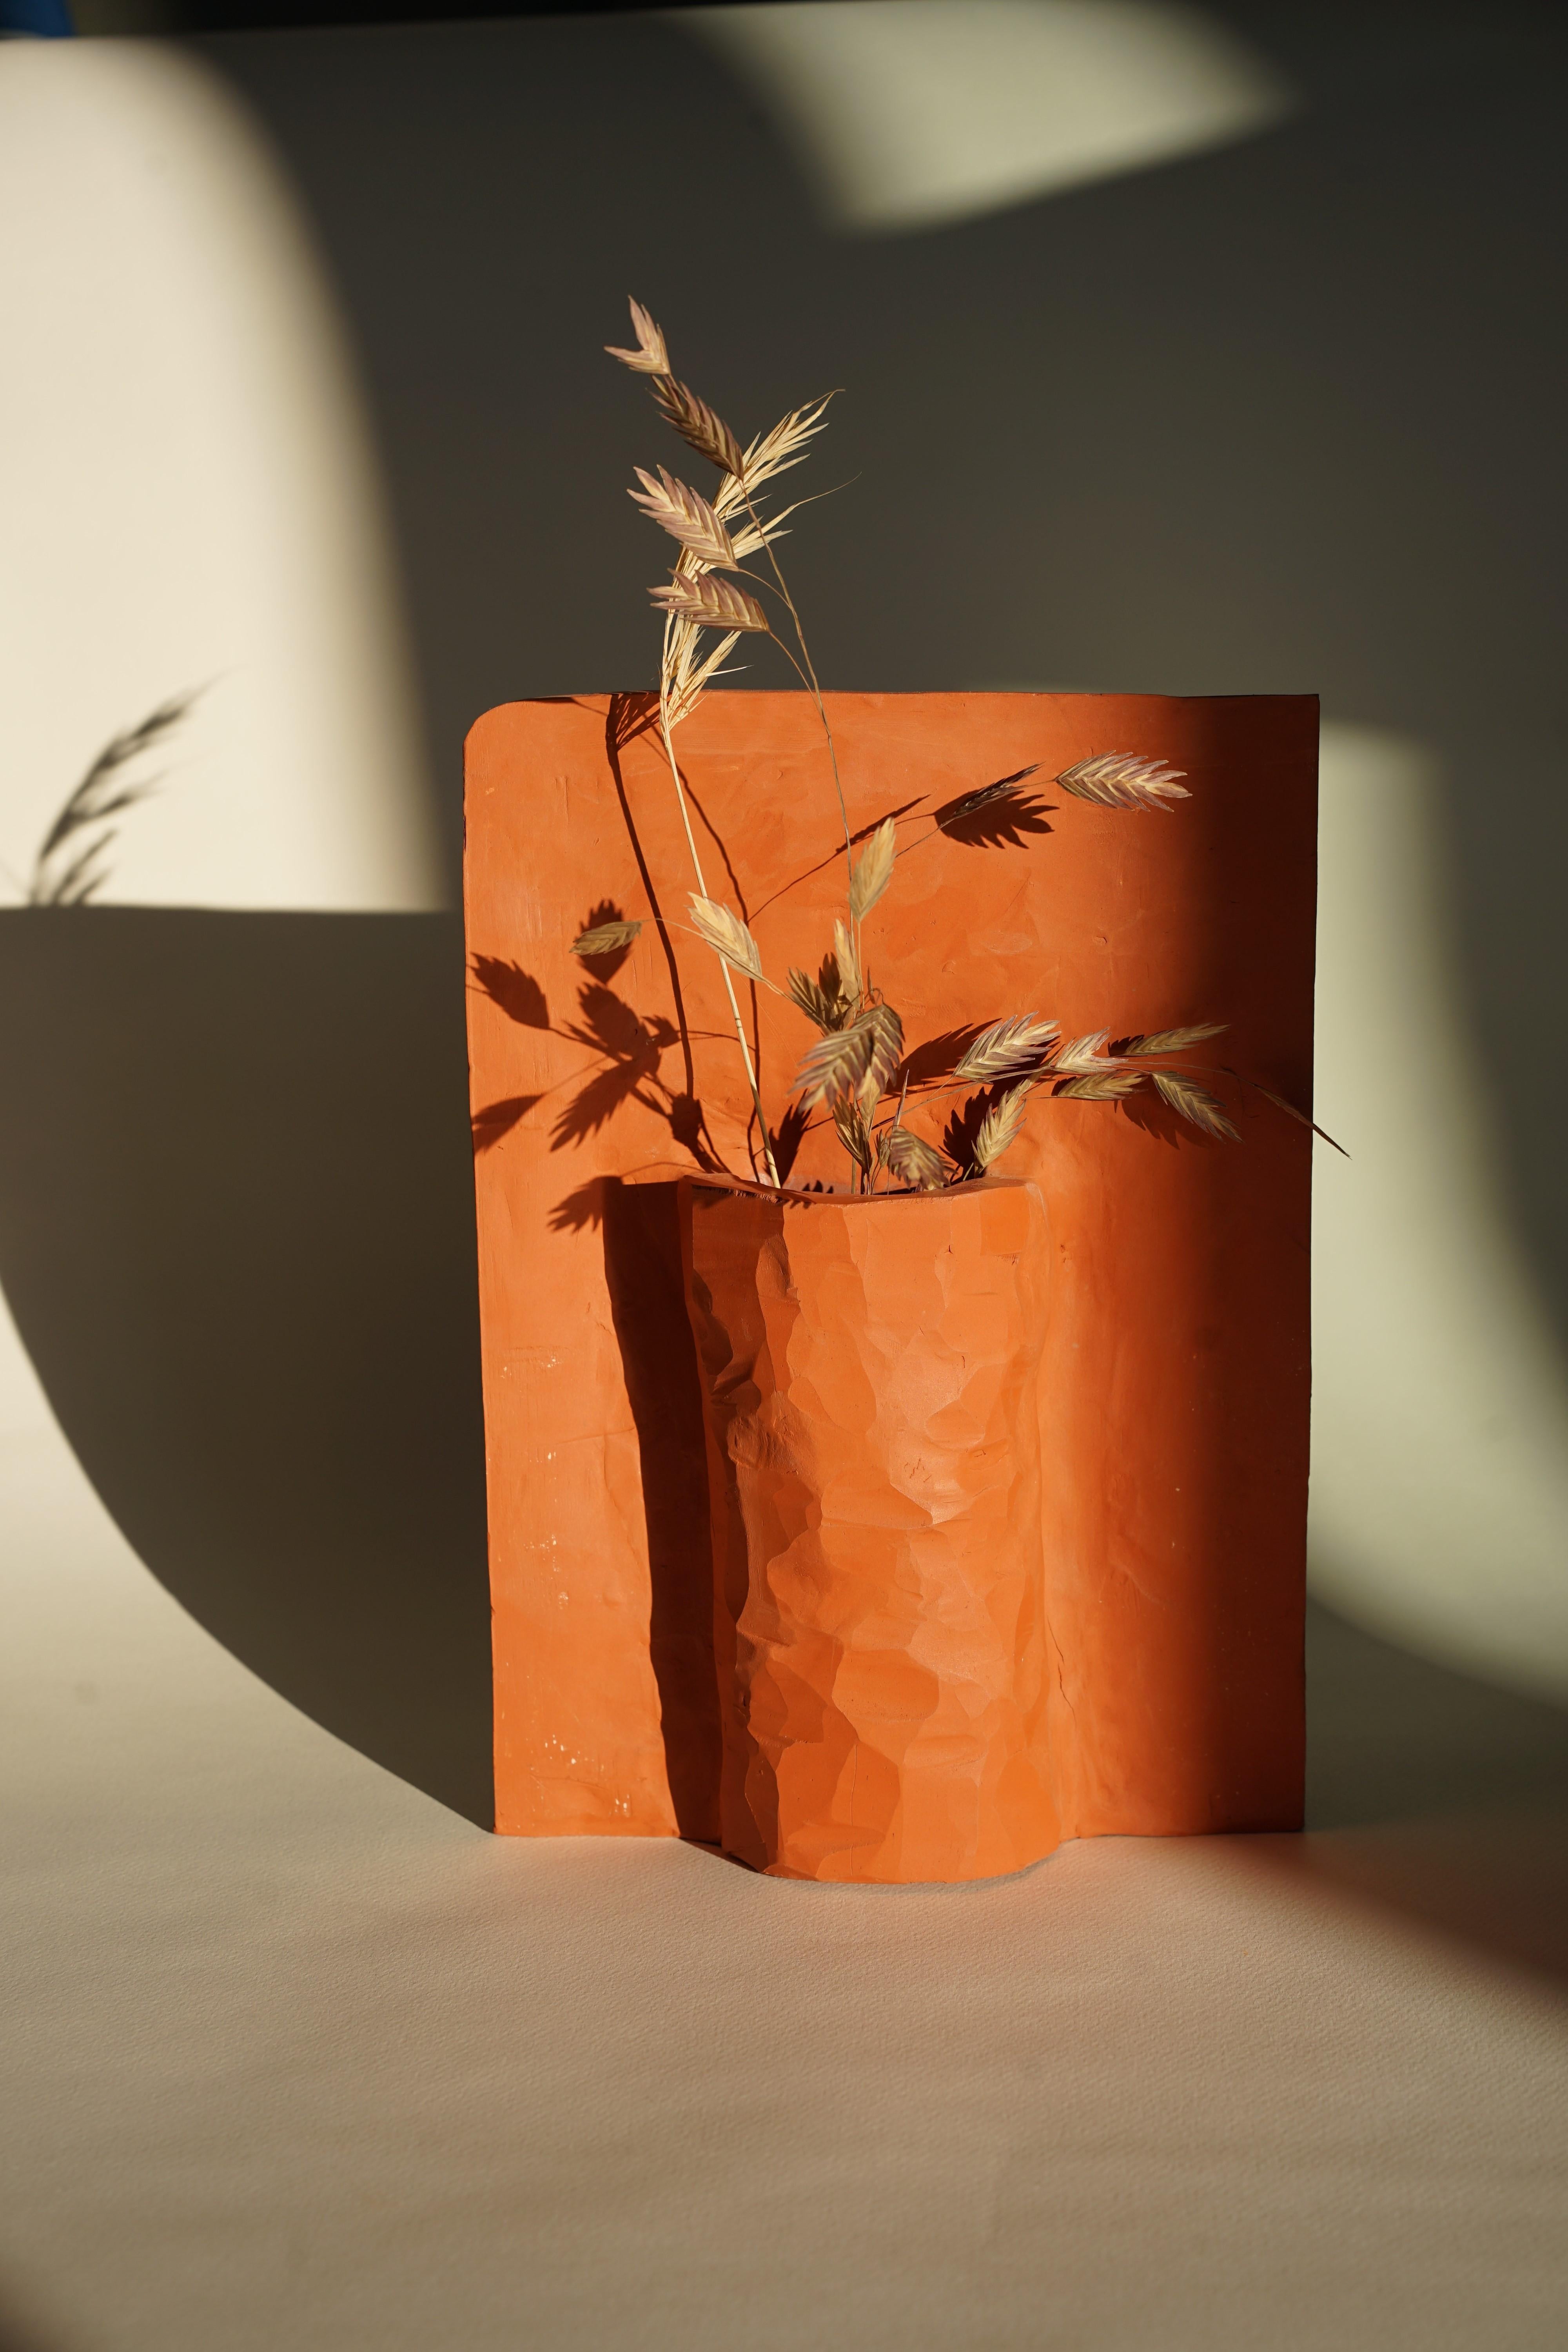 Unique INO_01 sculpture vase by Emmanuelle Roule
Unique piece
Dimensions: W 22 x H 28 cm
Materials: clay, terracotta glaze

Unique hand-modelled piece in raw terracotta and clay, on the back glazed with a shiny metallic effect. Not